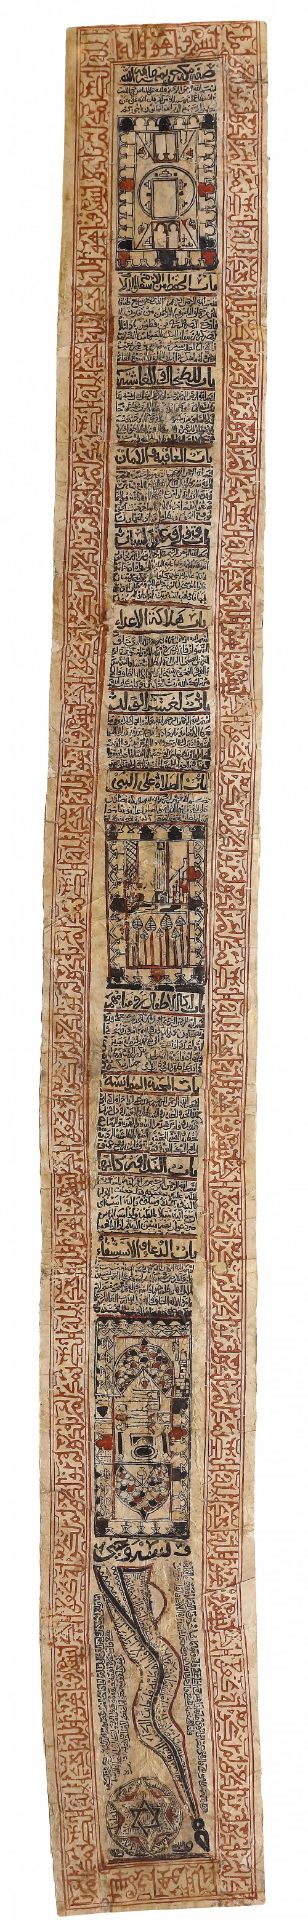 A TALISMANIC SCROLL, ANDALUSIA, 11TH-12TH CENTURY - Image 2 of 5